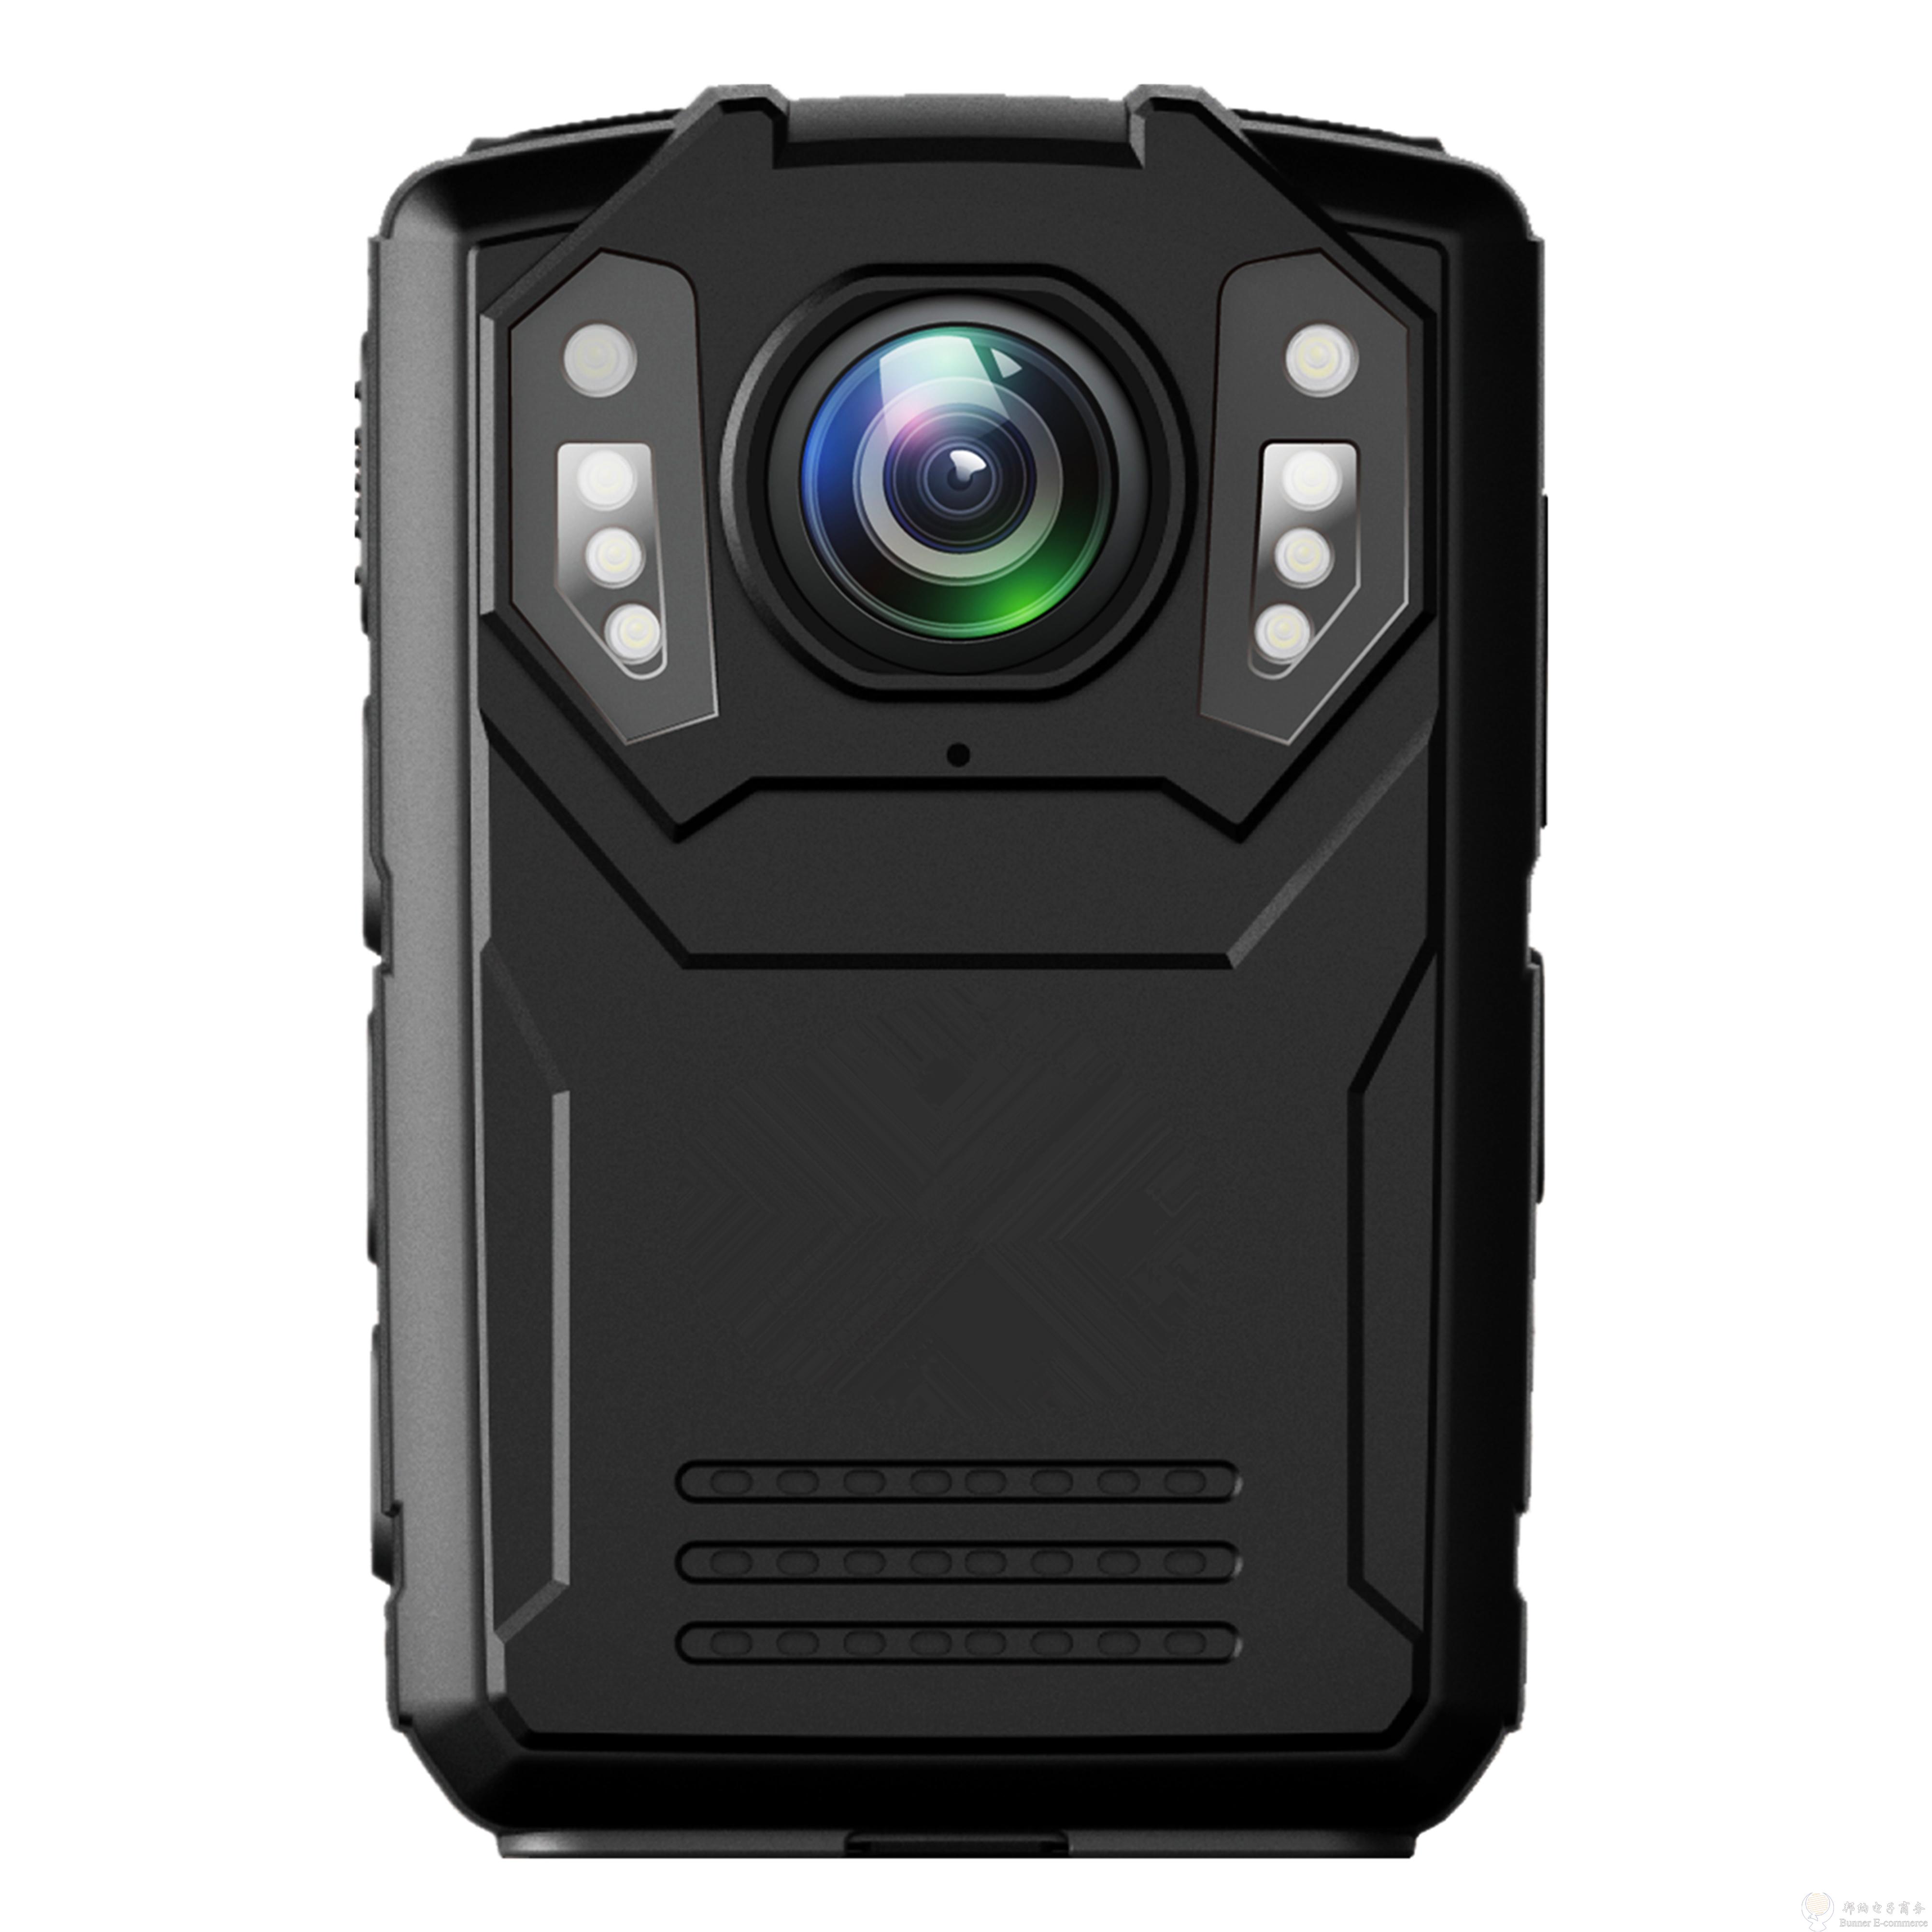 Bodycam 1080P 128GB 4G WIFI and GPS version SOS and Push-to-talk c